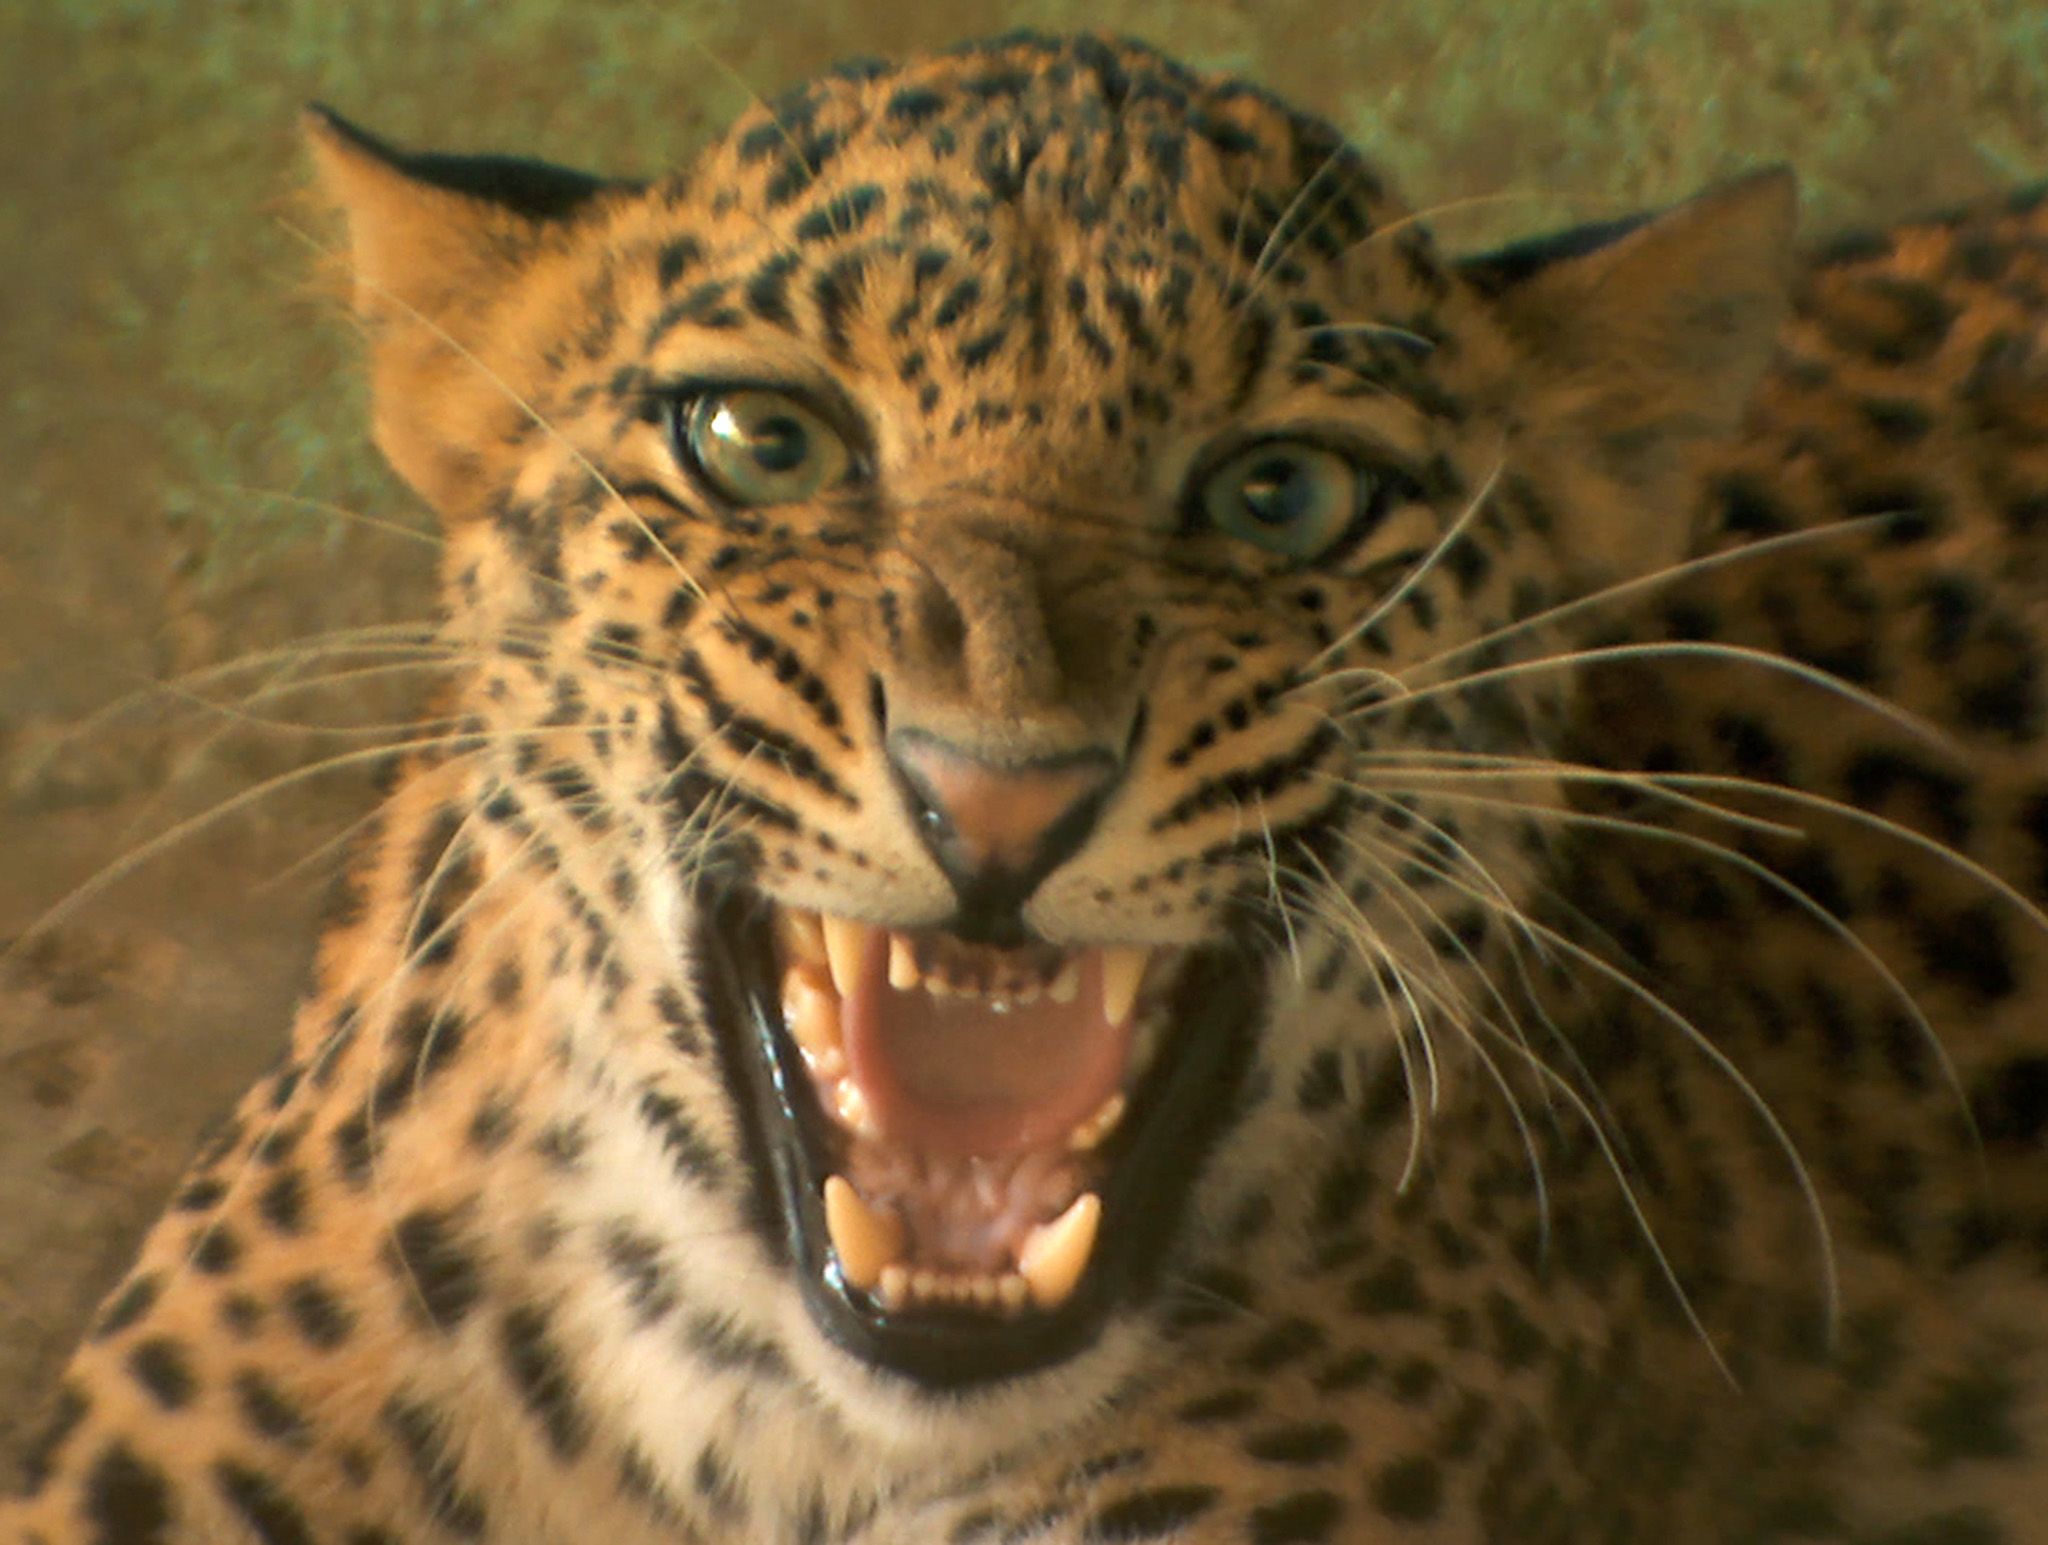 Angel the leopard at the Wildlife SOS Manikdoh Leopard Sanctuary.  This image is from Jungle Heroes. [Photo of the day - February 2020]